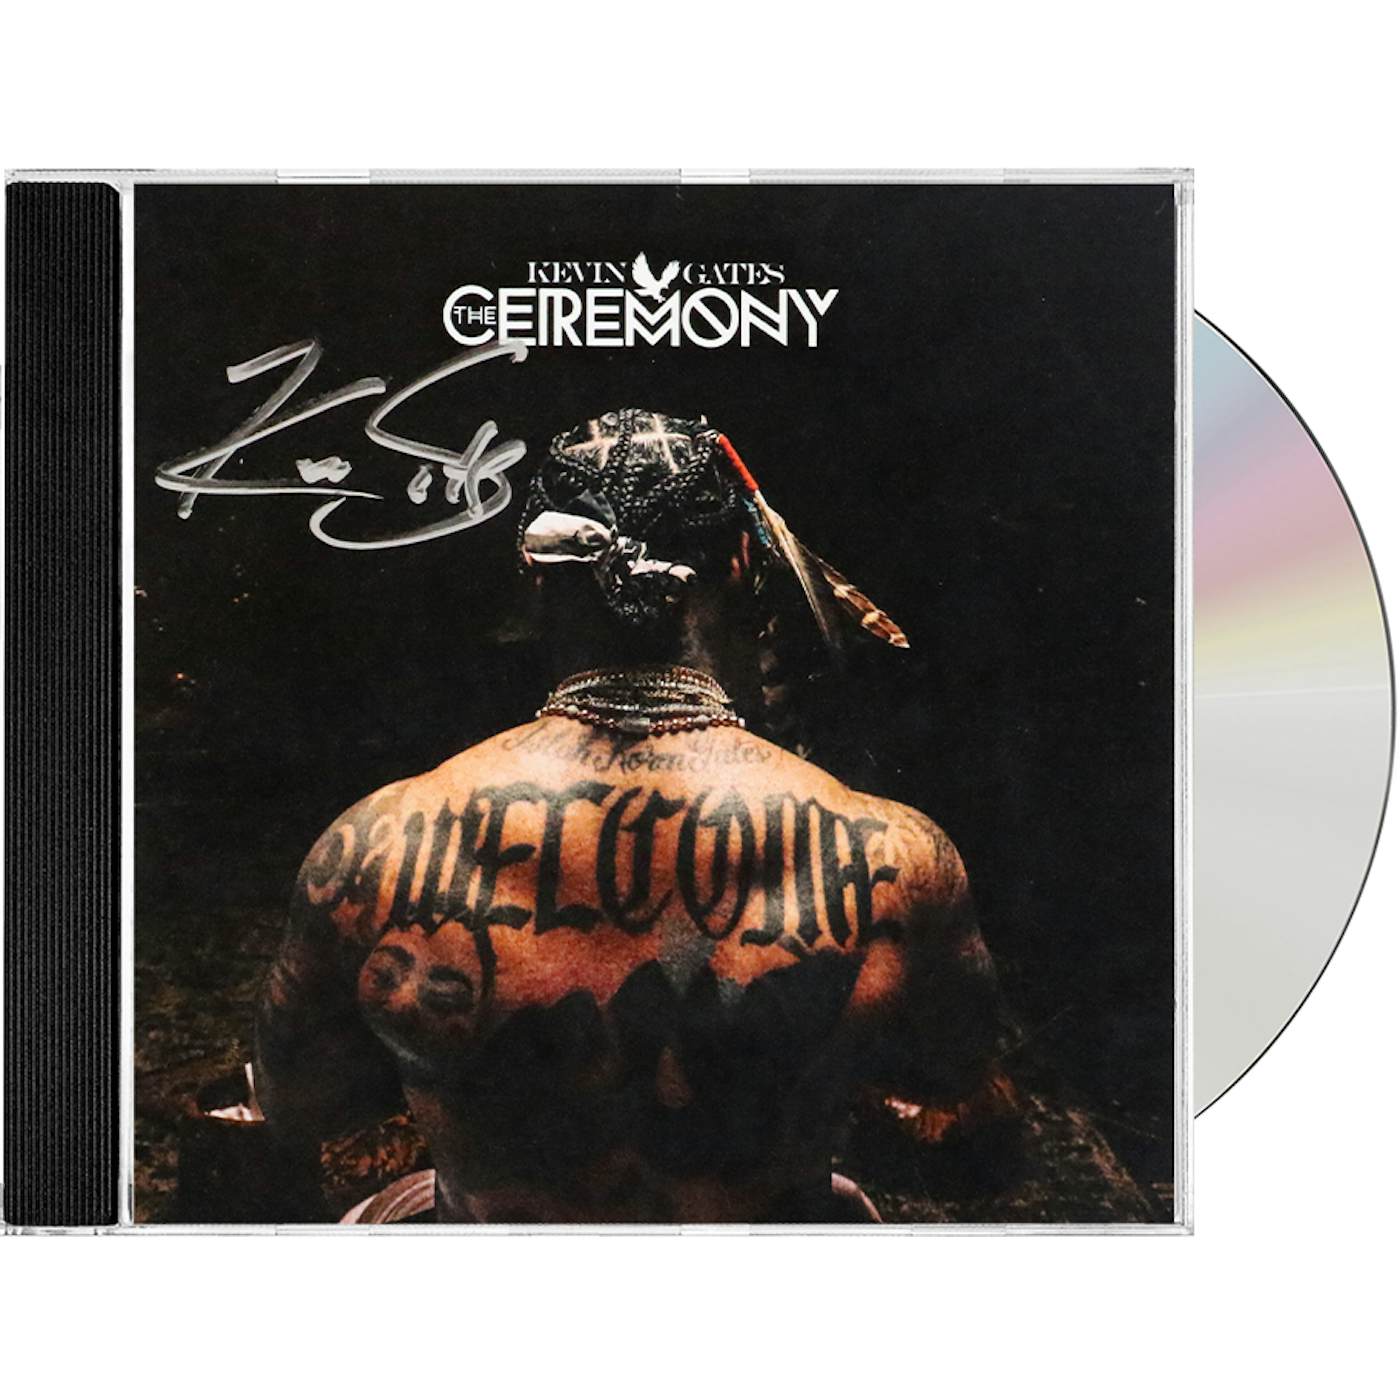 Kevin Gates The Ceremony - Signed CD